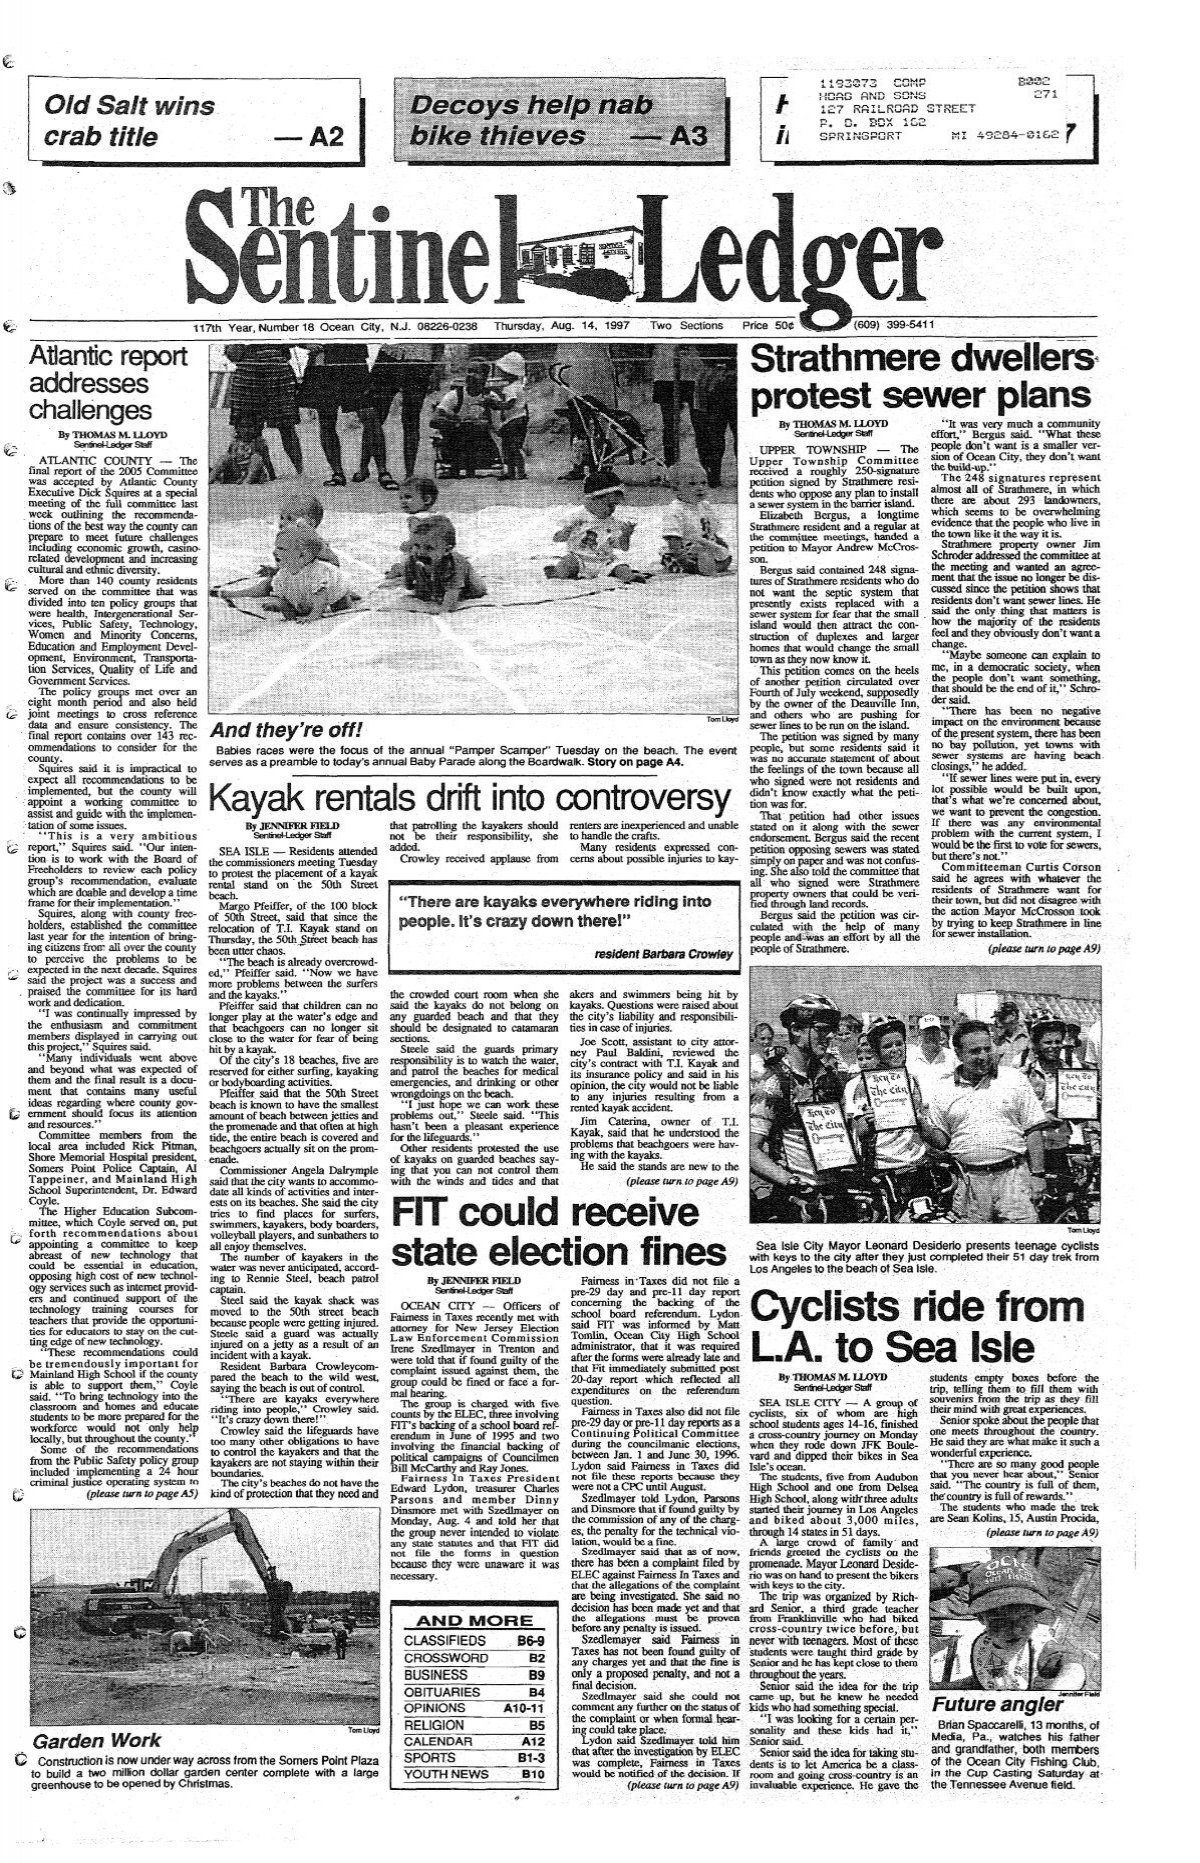 Cyclists ride from L.A. to Sea Isle - On-Line Newspaper Archives